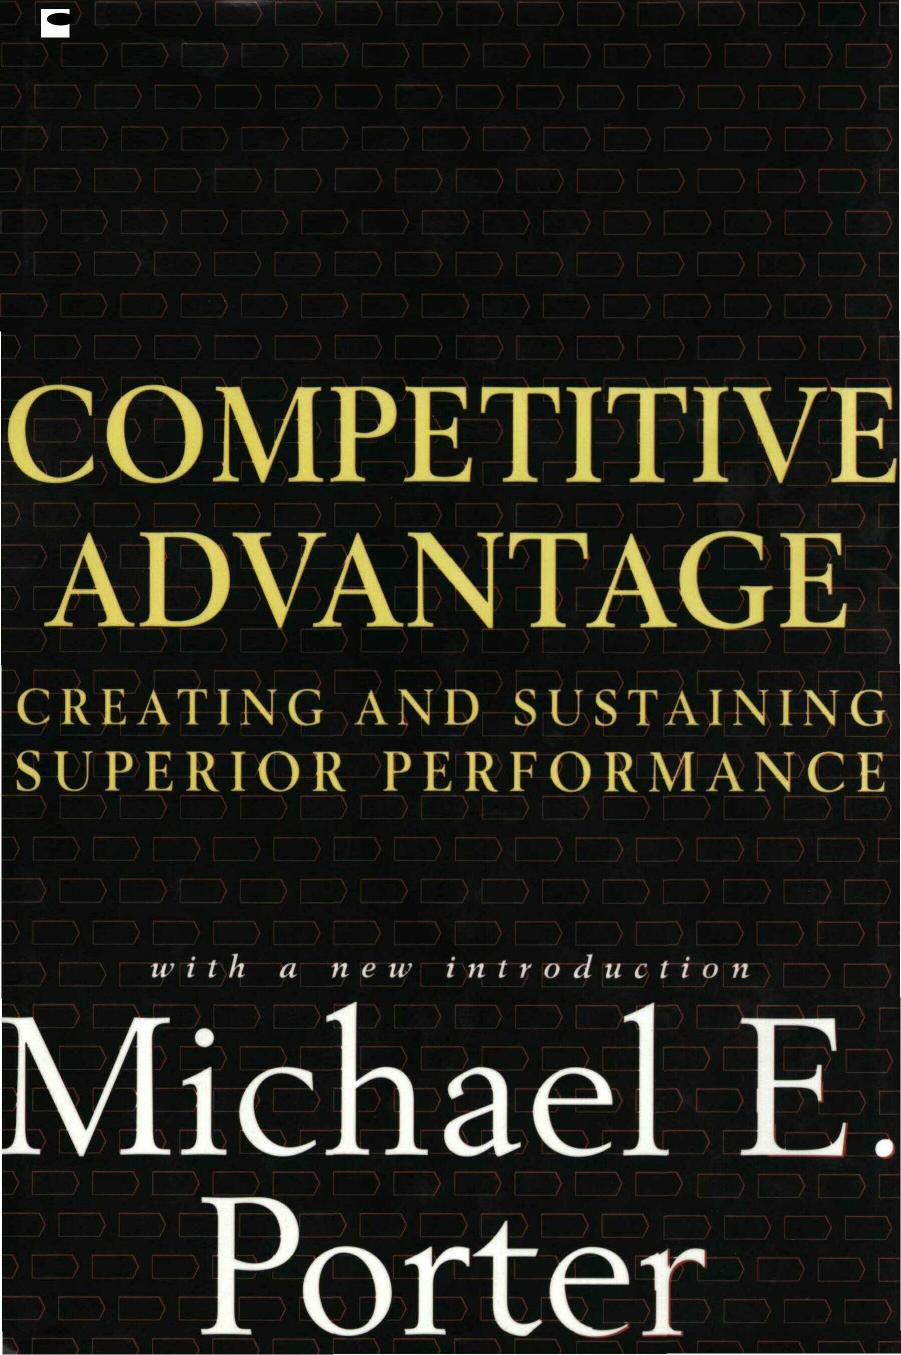 Michael E. Porter Competitive Advantage Creating and Sustaining Superior Performance 1998